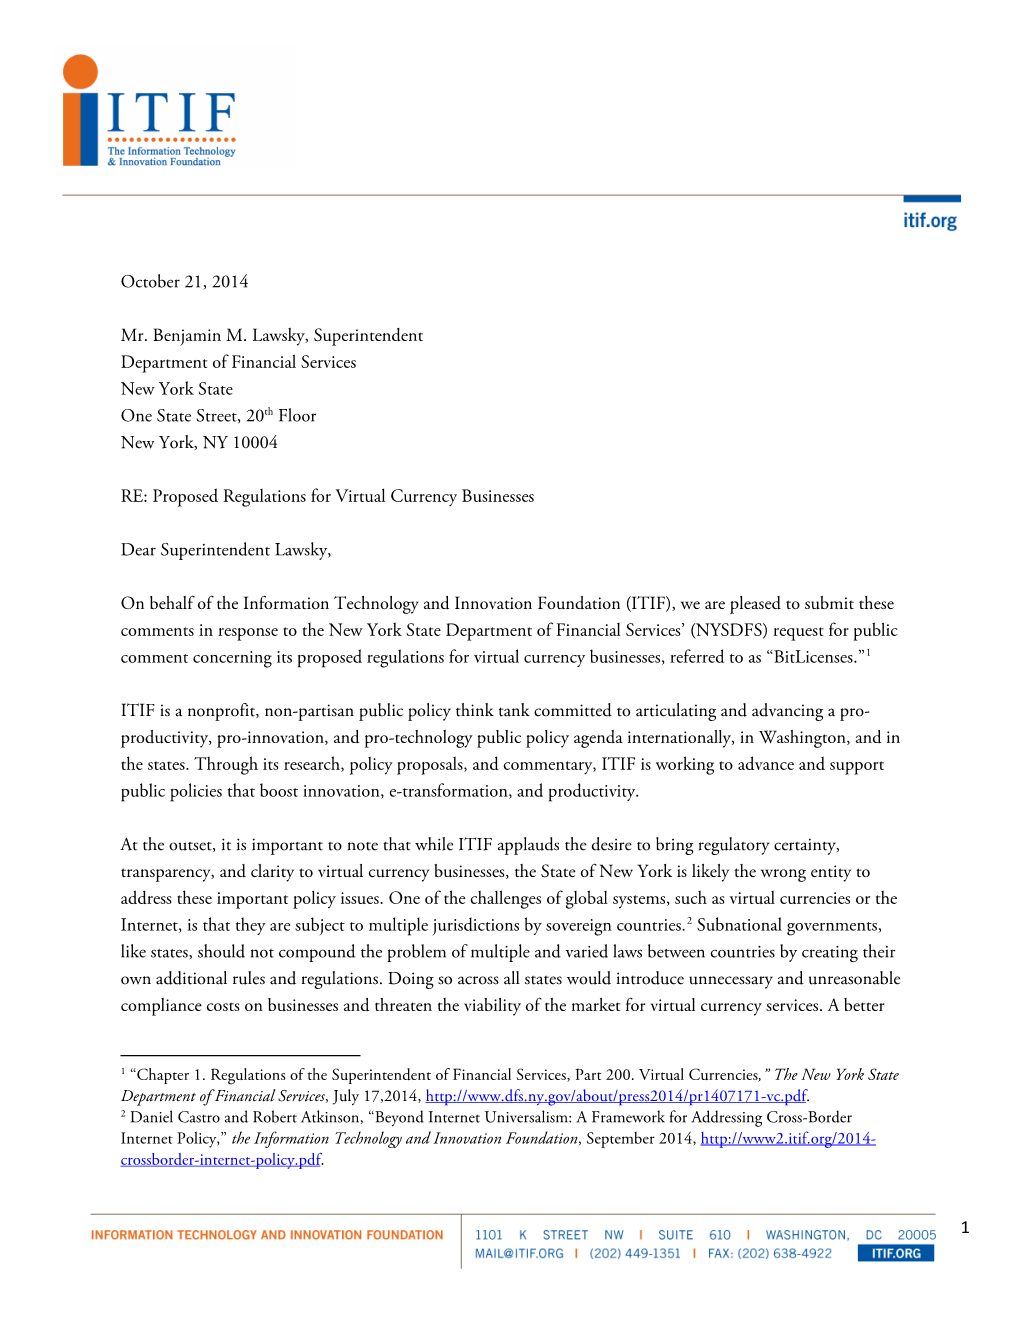 ITIF Comments to the New York State Department of Financial Services